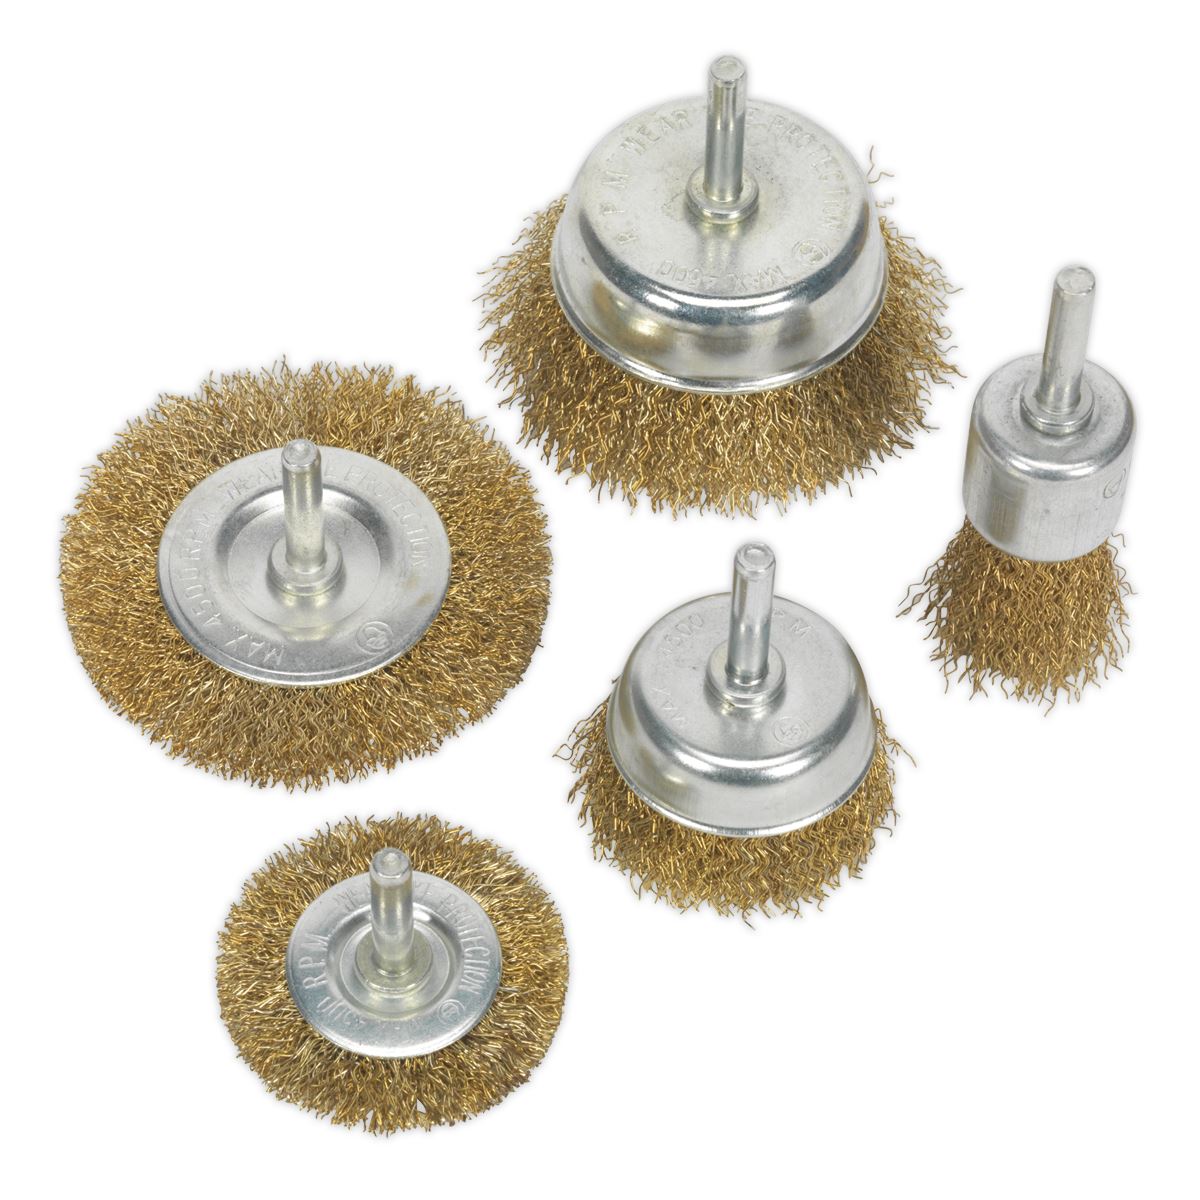 Sealey Crimped Wire Brush Set 5pc Brassed